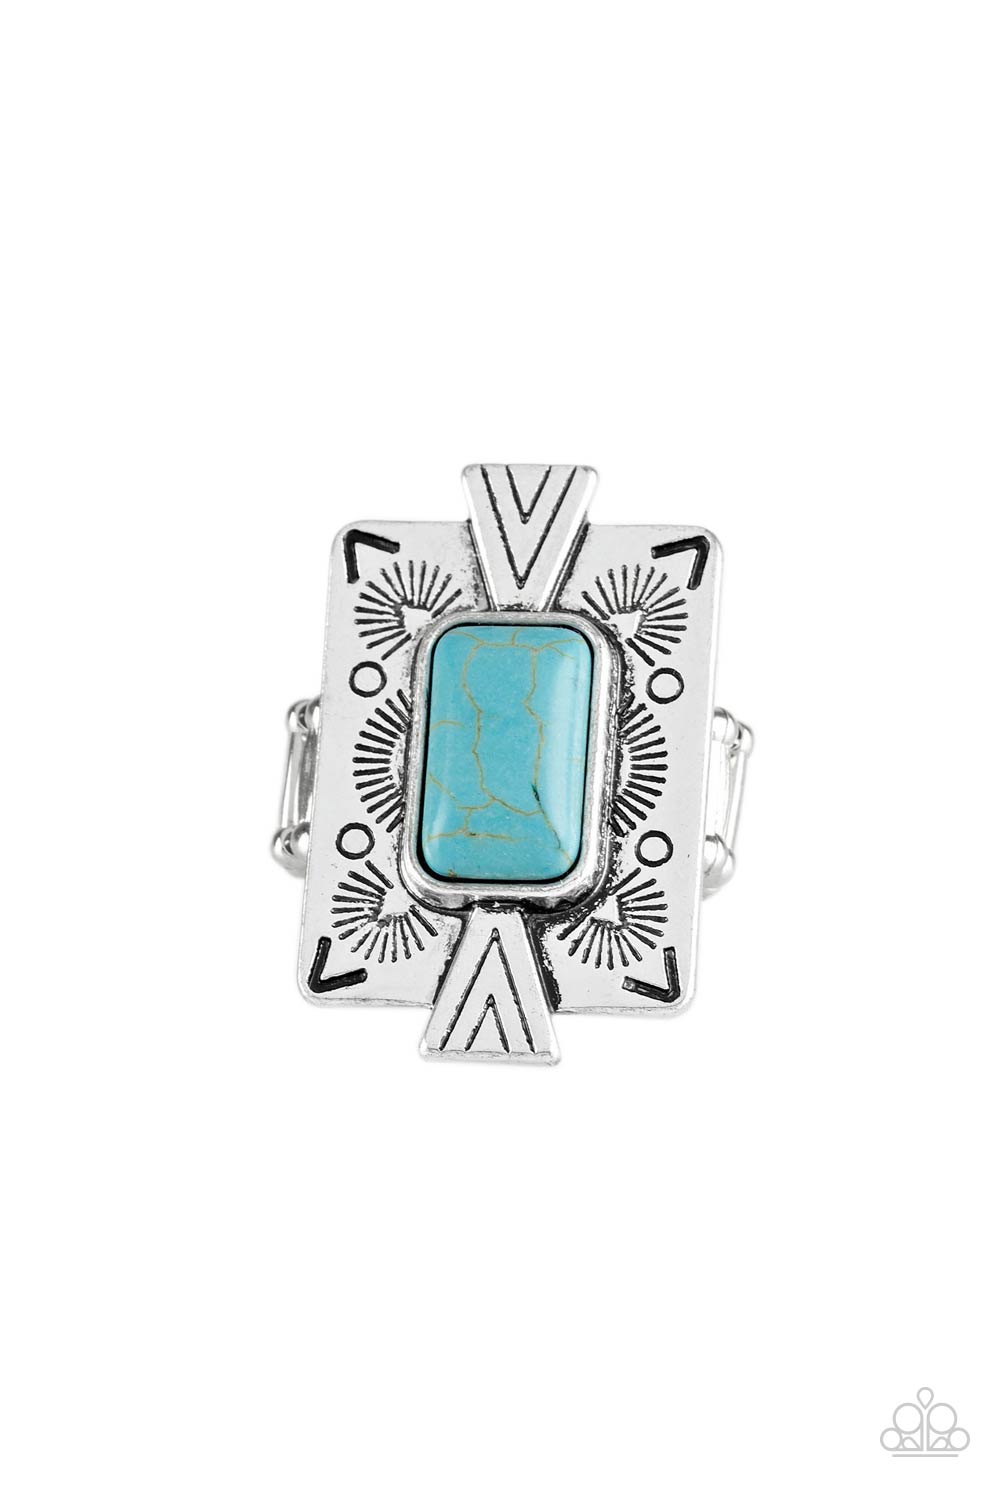 Stone Cold Couture  - Blue Turquoise Ring - Paparazzi Accessories